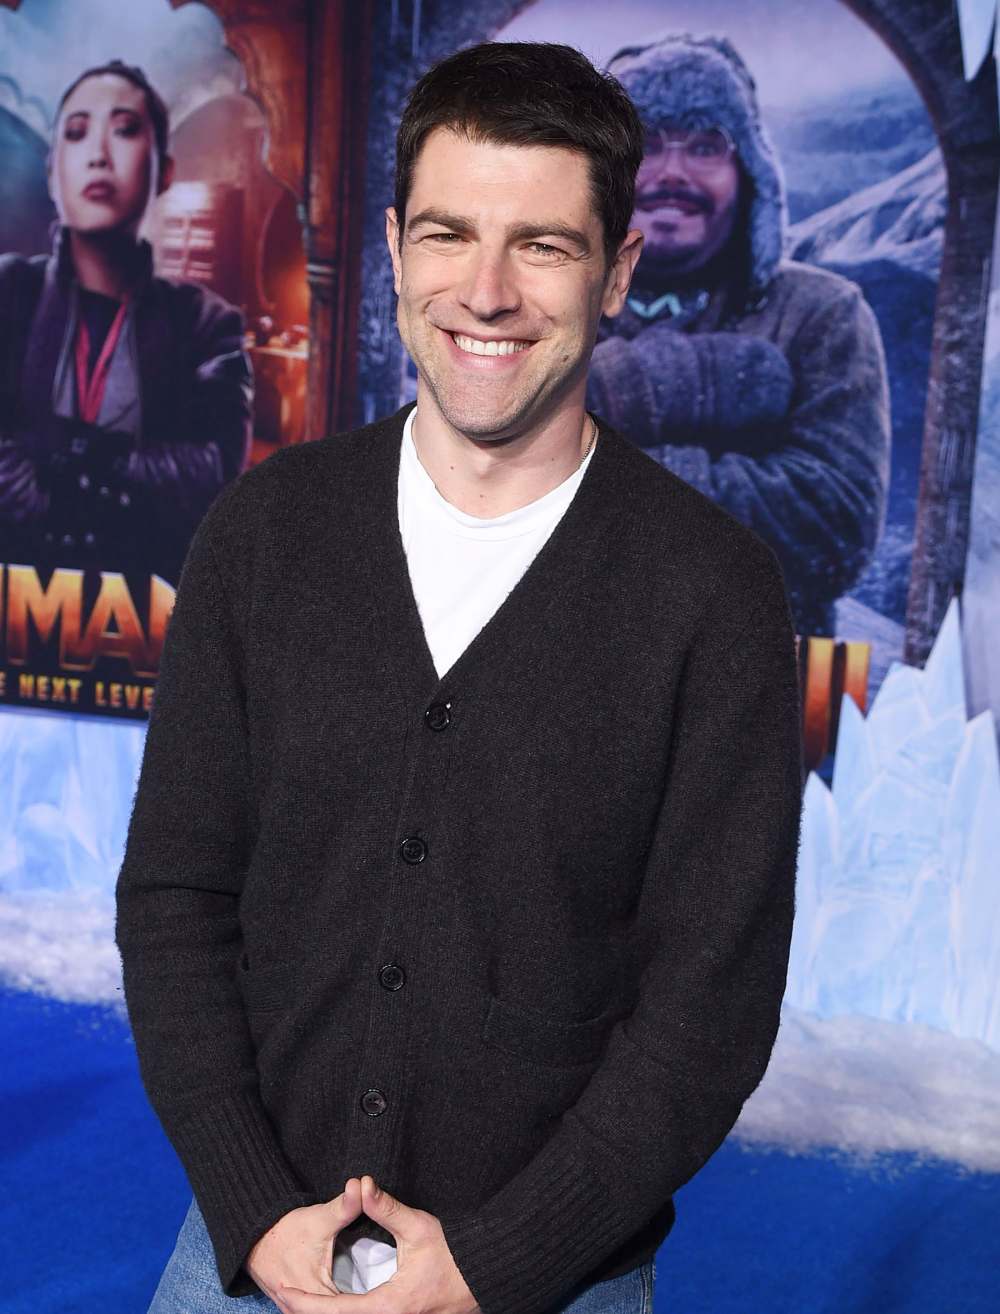 Max Greenfield Jokes About 'Hiding' From Kids in Closet While Quarantining